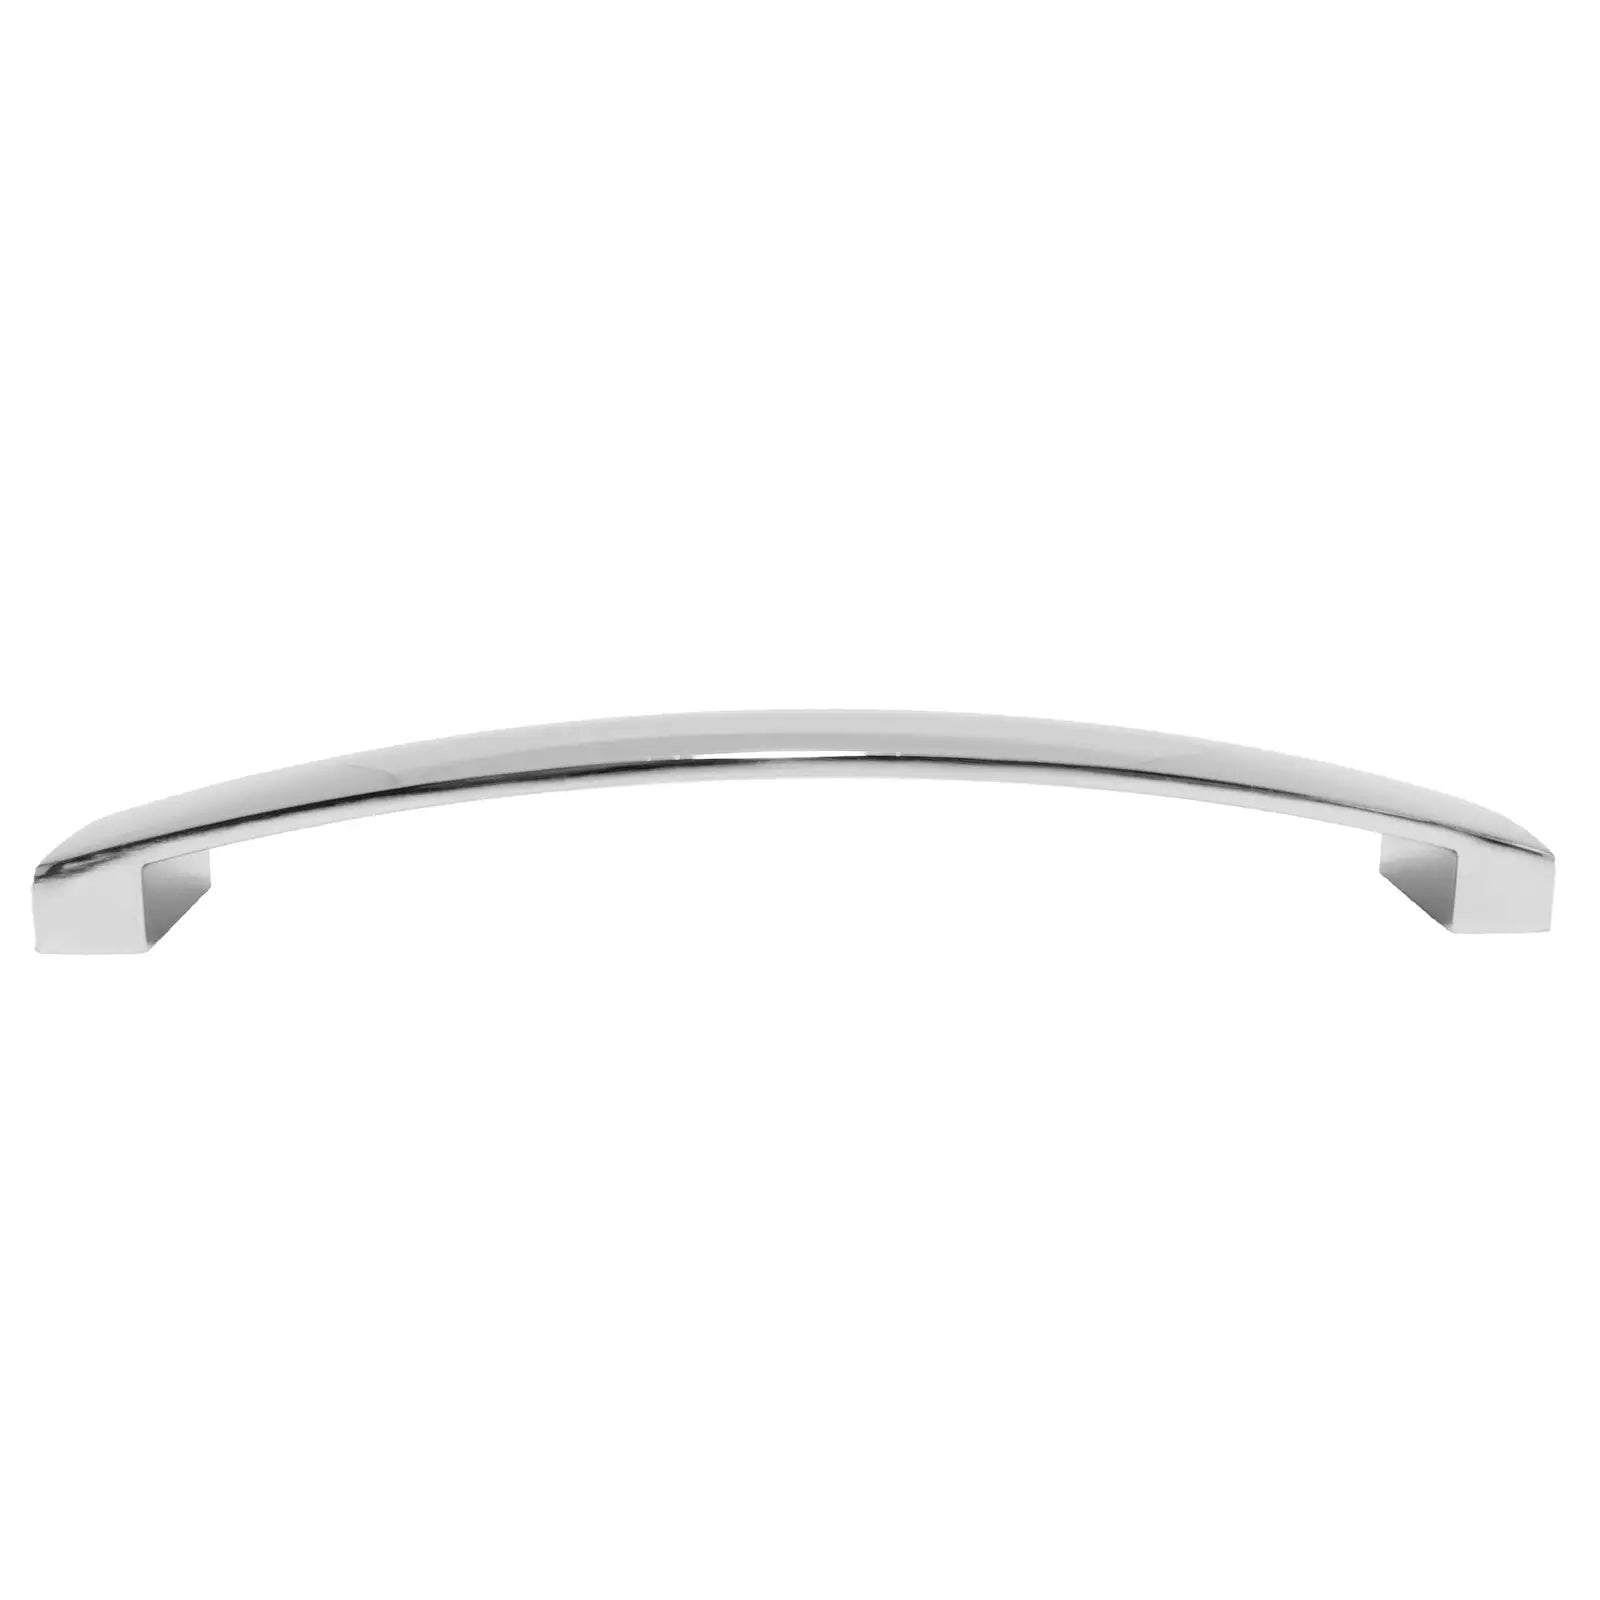 Asteria - Bow Kitchen Cupboard Handle - Polished Chrome